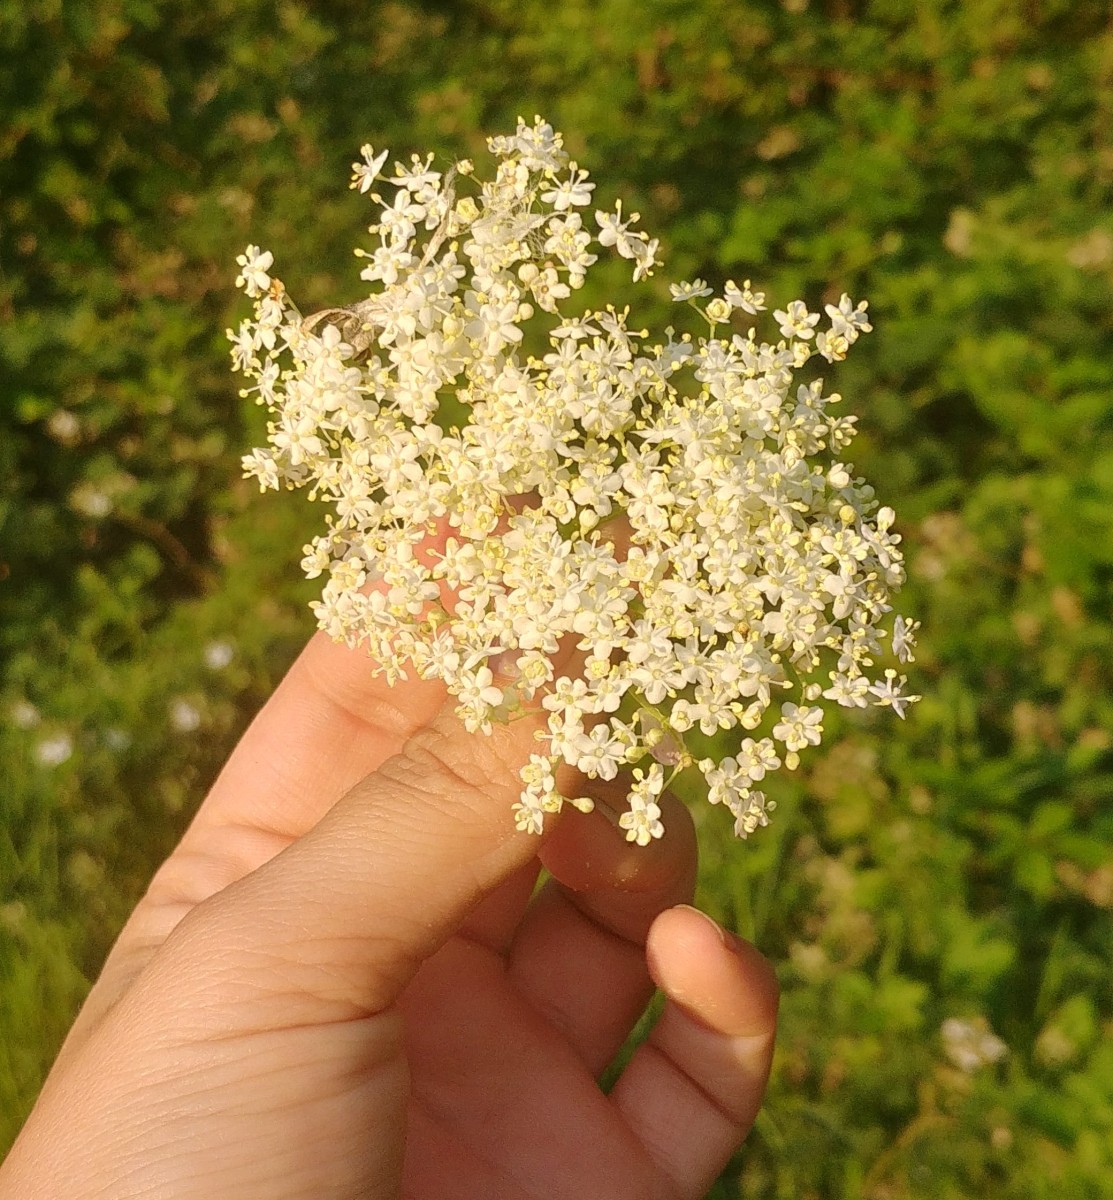 Elderflower champagne tastes of British summer. Unusually this is something you will struggle to buy, you have to instead engage in the quest for the 